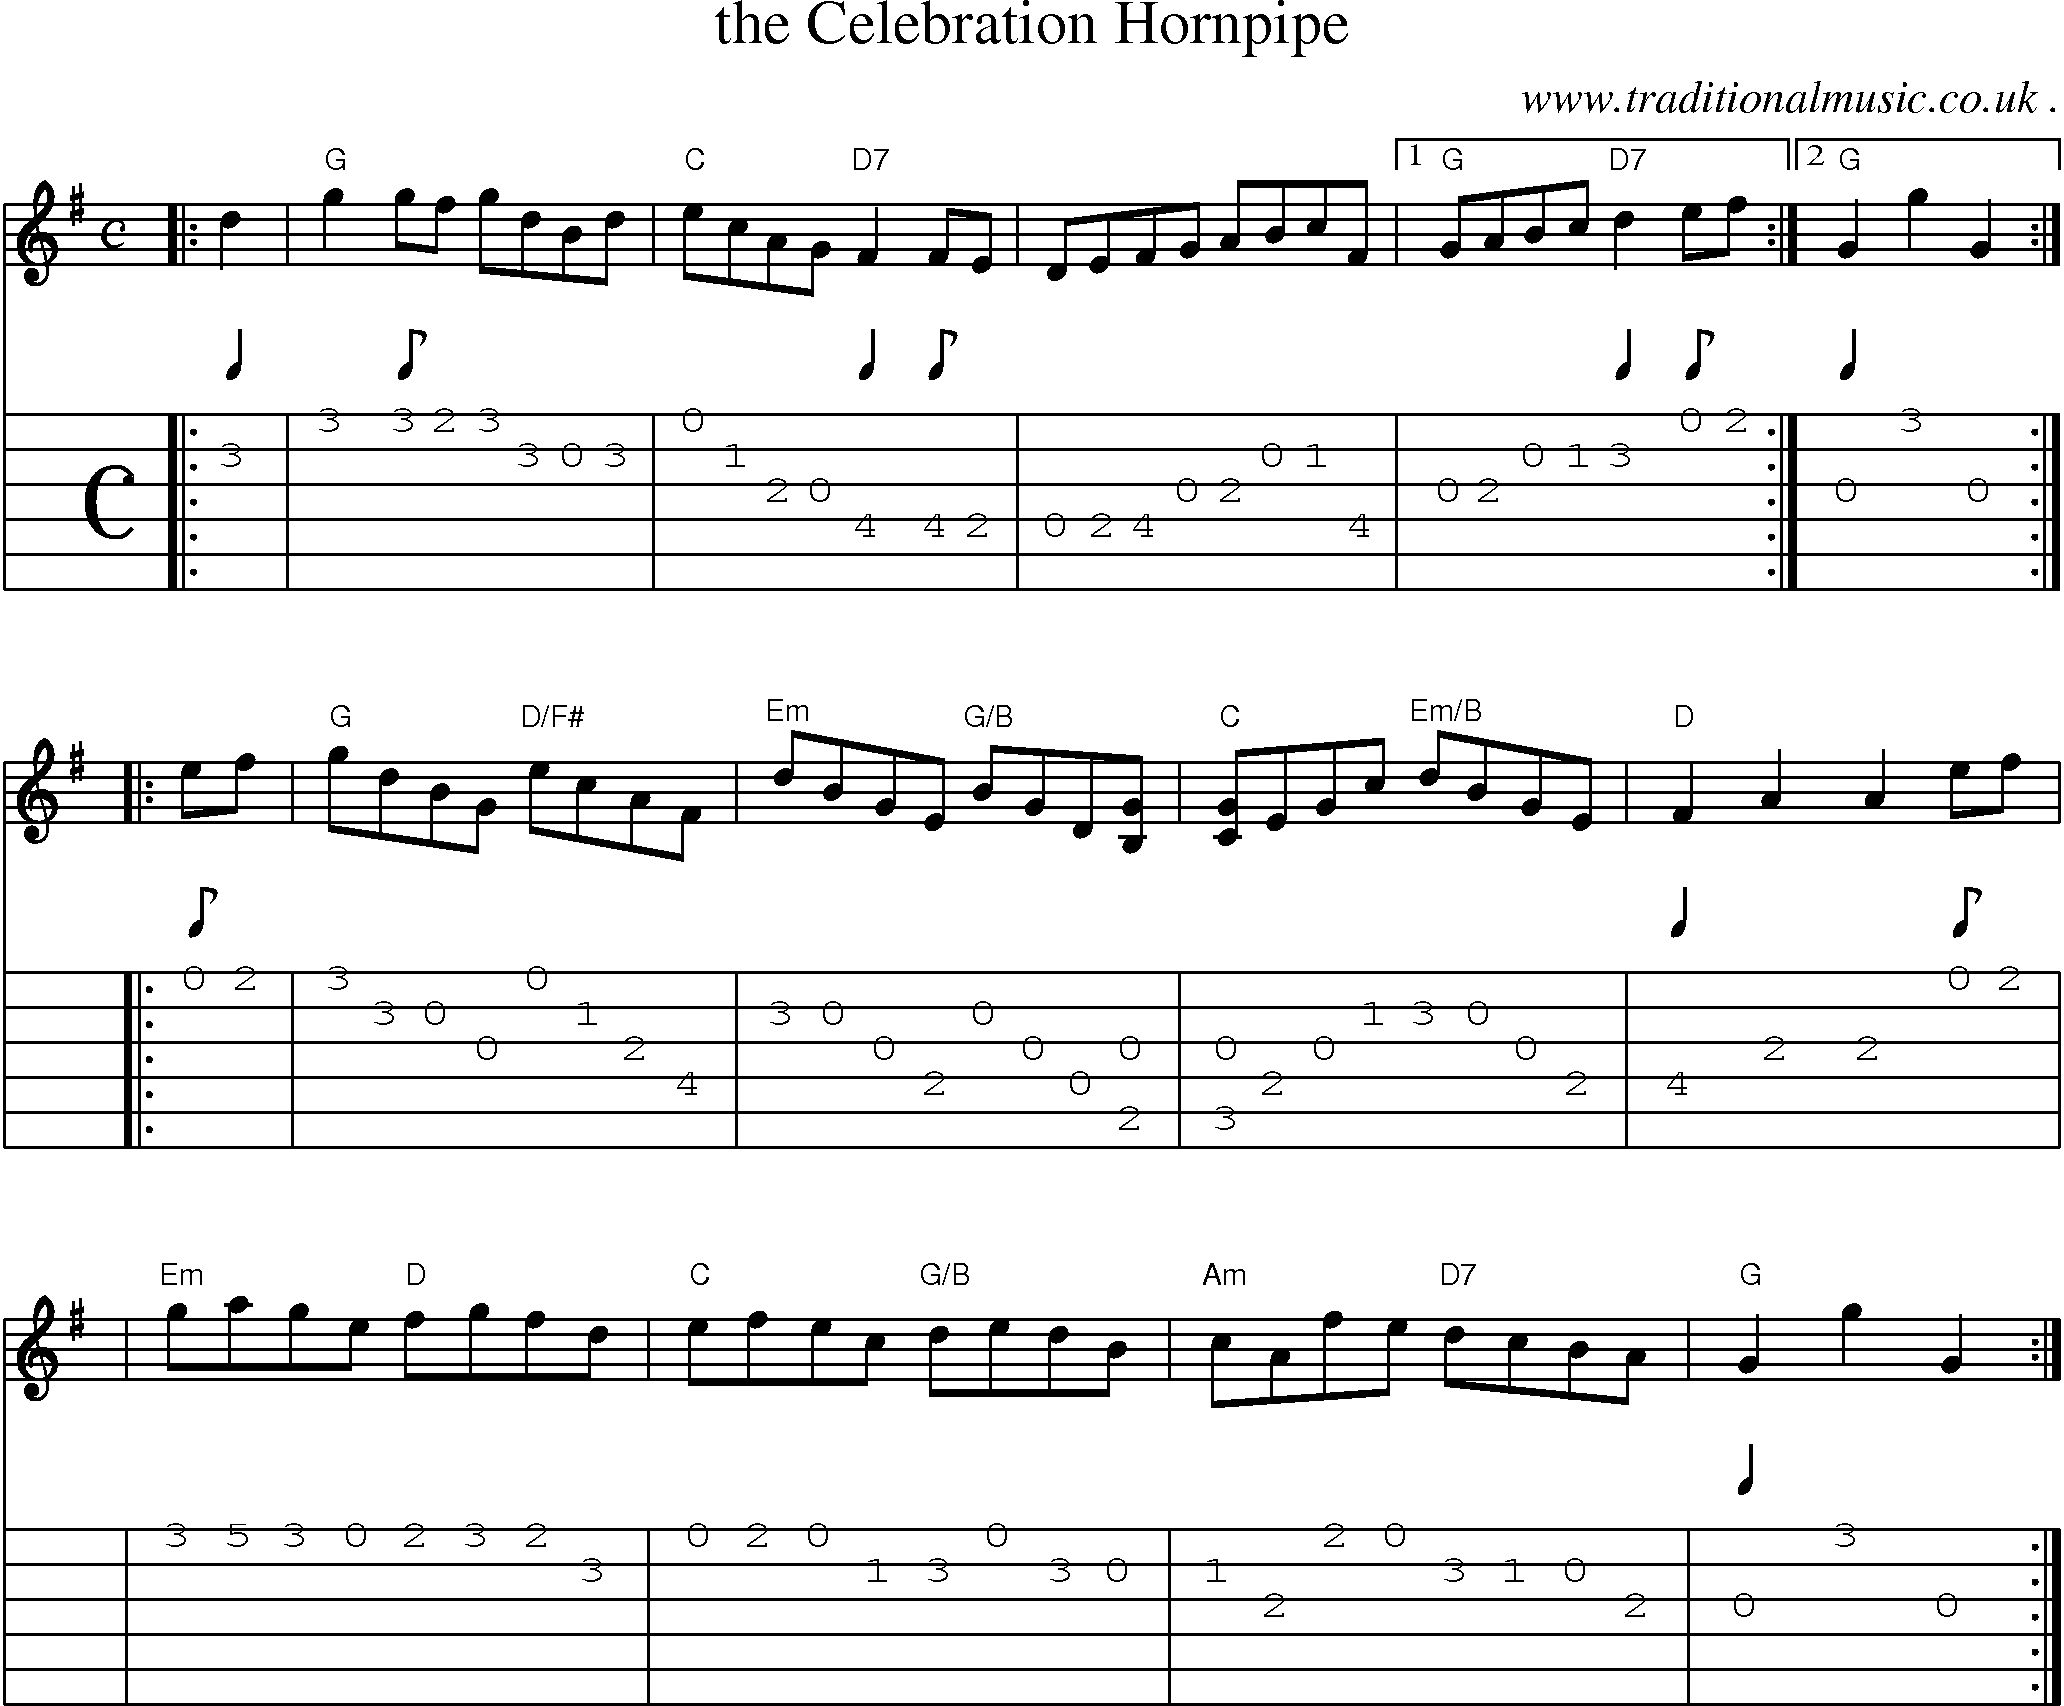 Sheet-music  score, Chords and Guitar Tabs for The Celebration Hornpipe